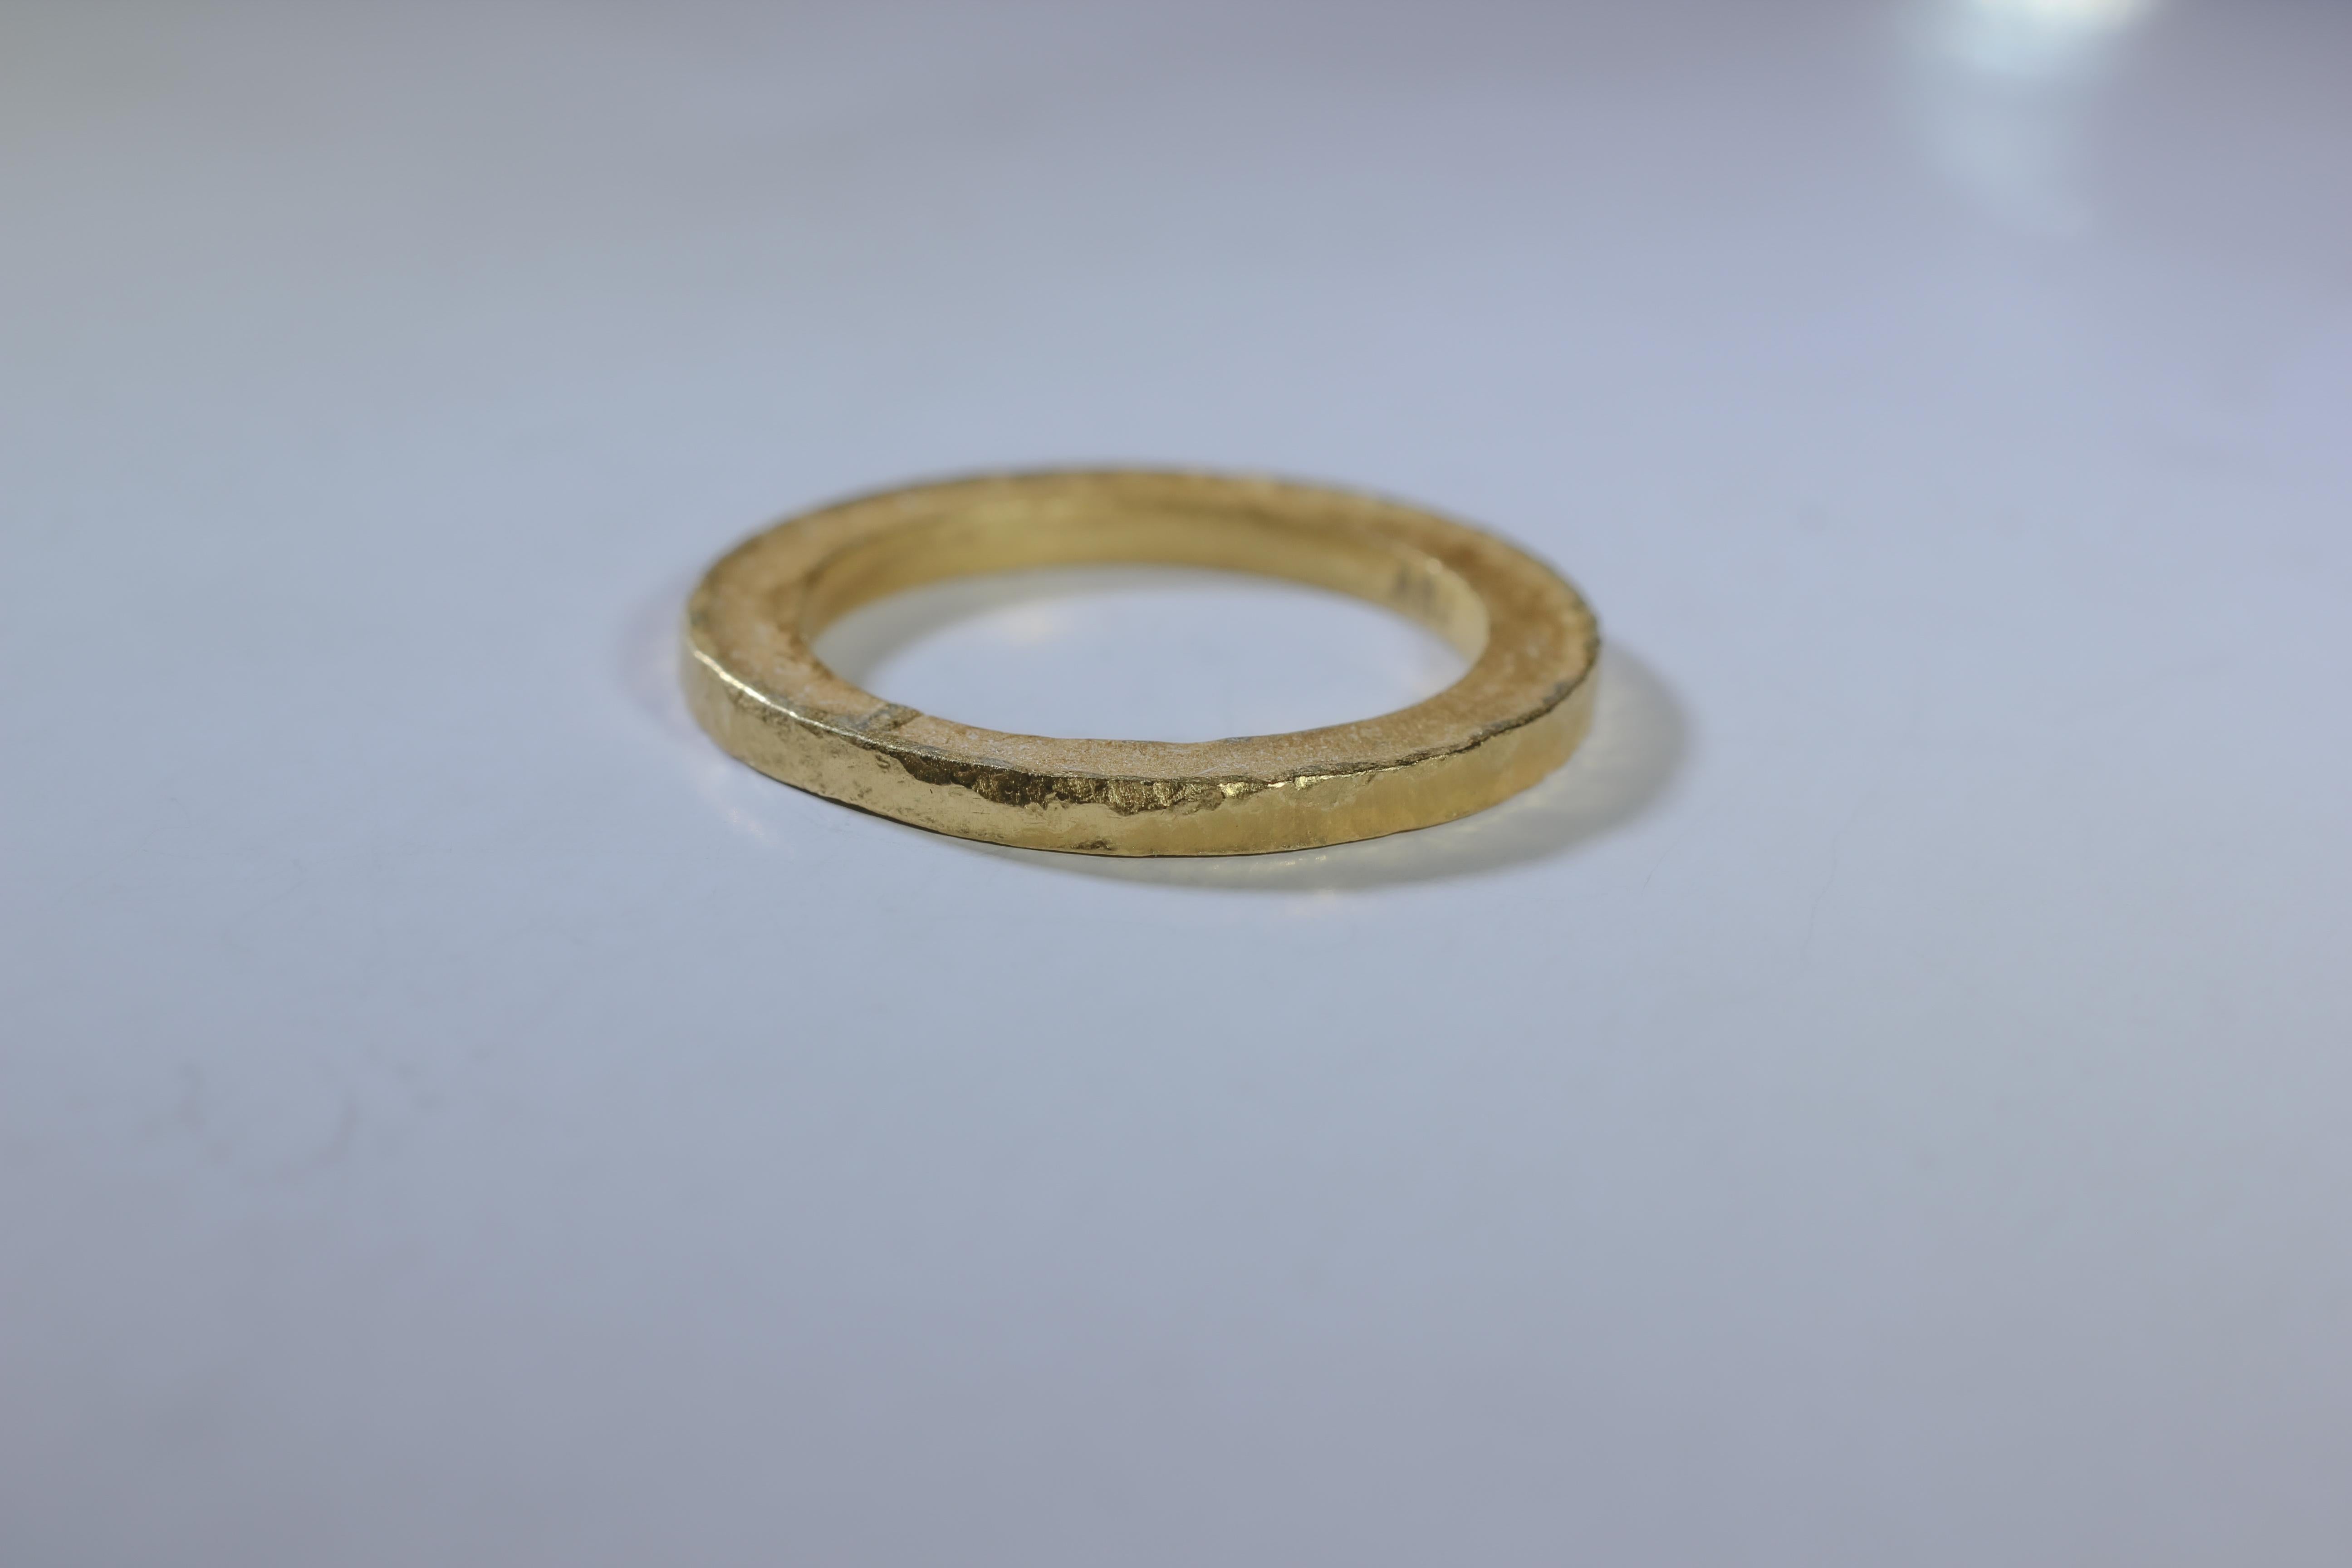 A bridal or wedding band ring in recycled 22K gold. The Simplicity Large Disk, a contemporary unisex wedding band ring is designed and handcrafted by AB Jewelry NYC. Ideal for a man or a woman. Wear it alone or as a fashionable stacking ring